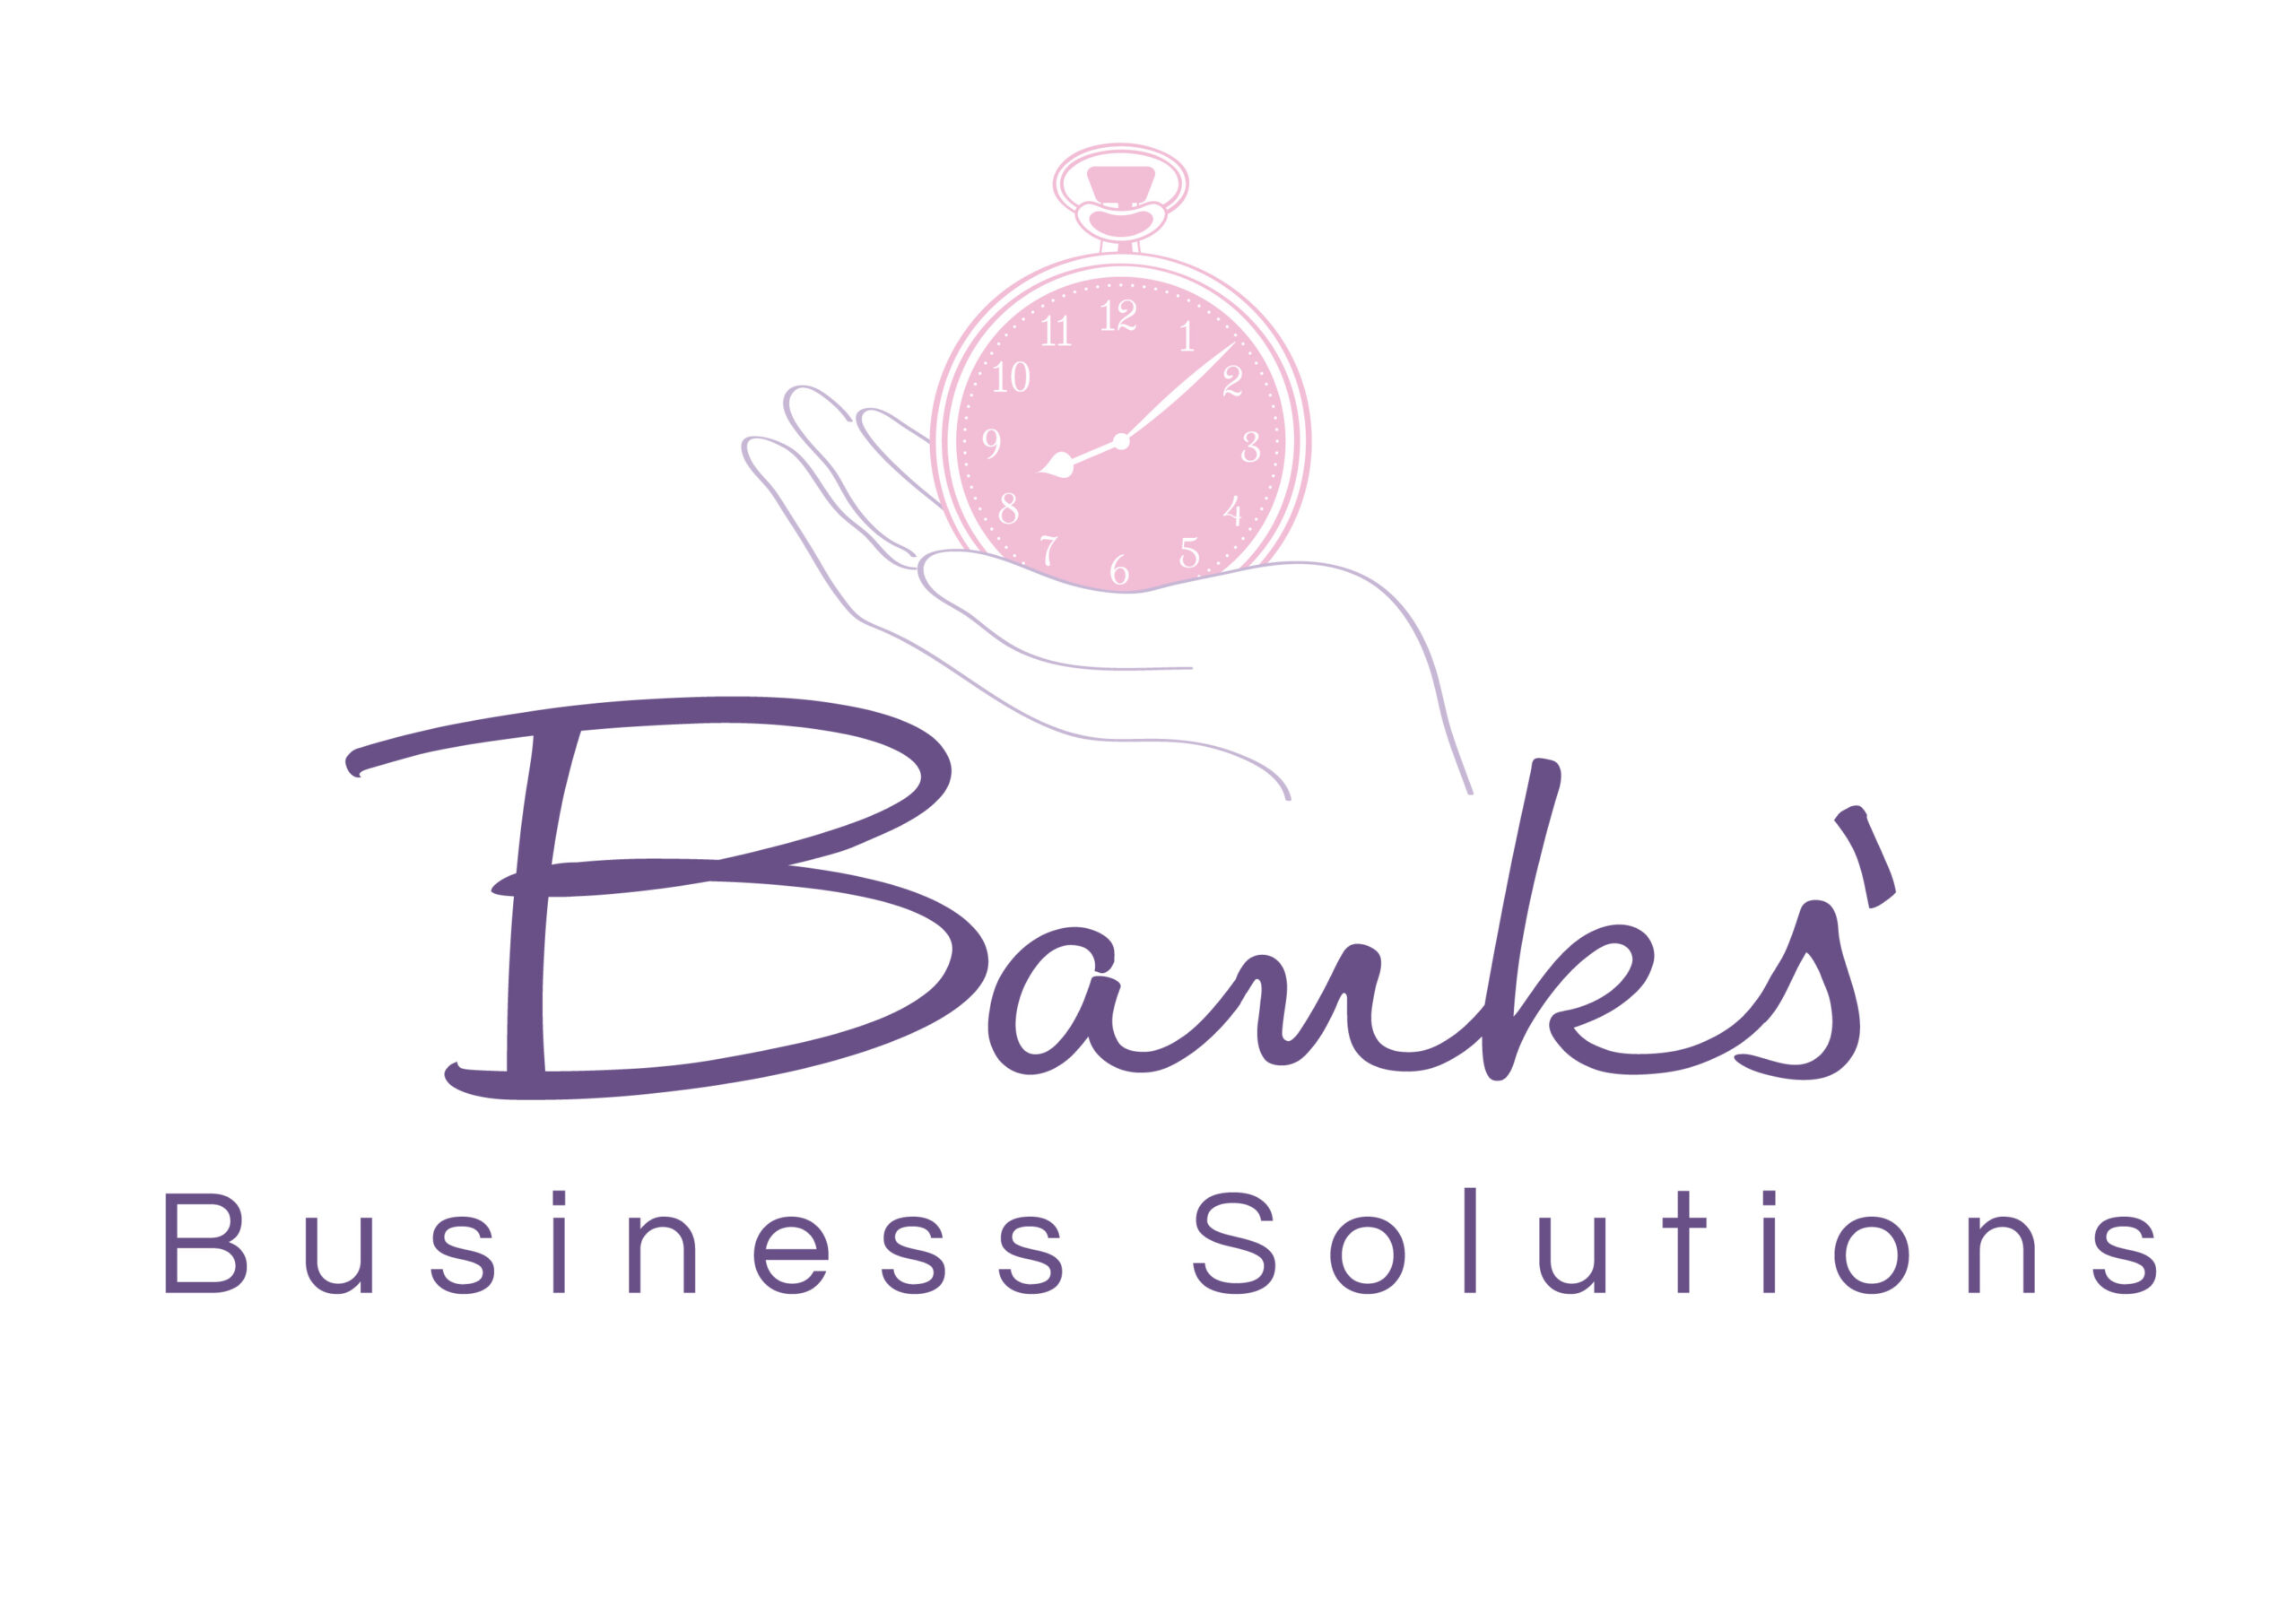 Banks' Business Solutions Logo